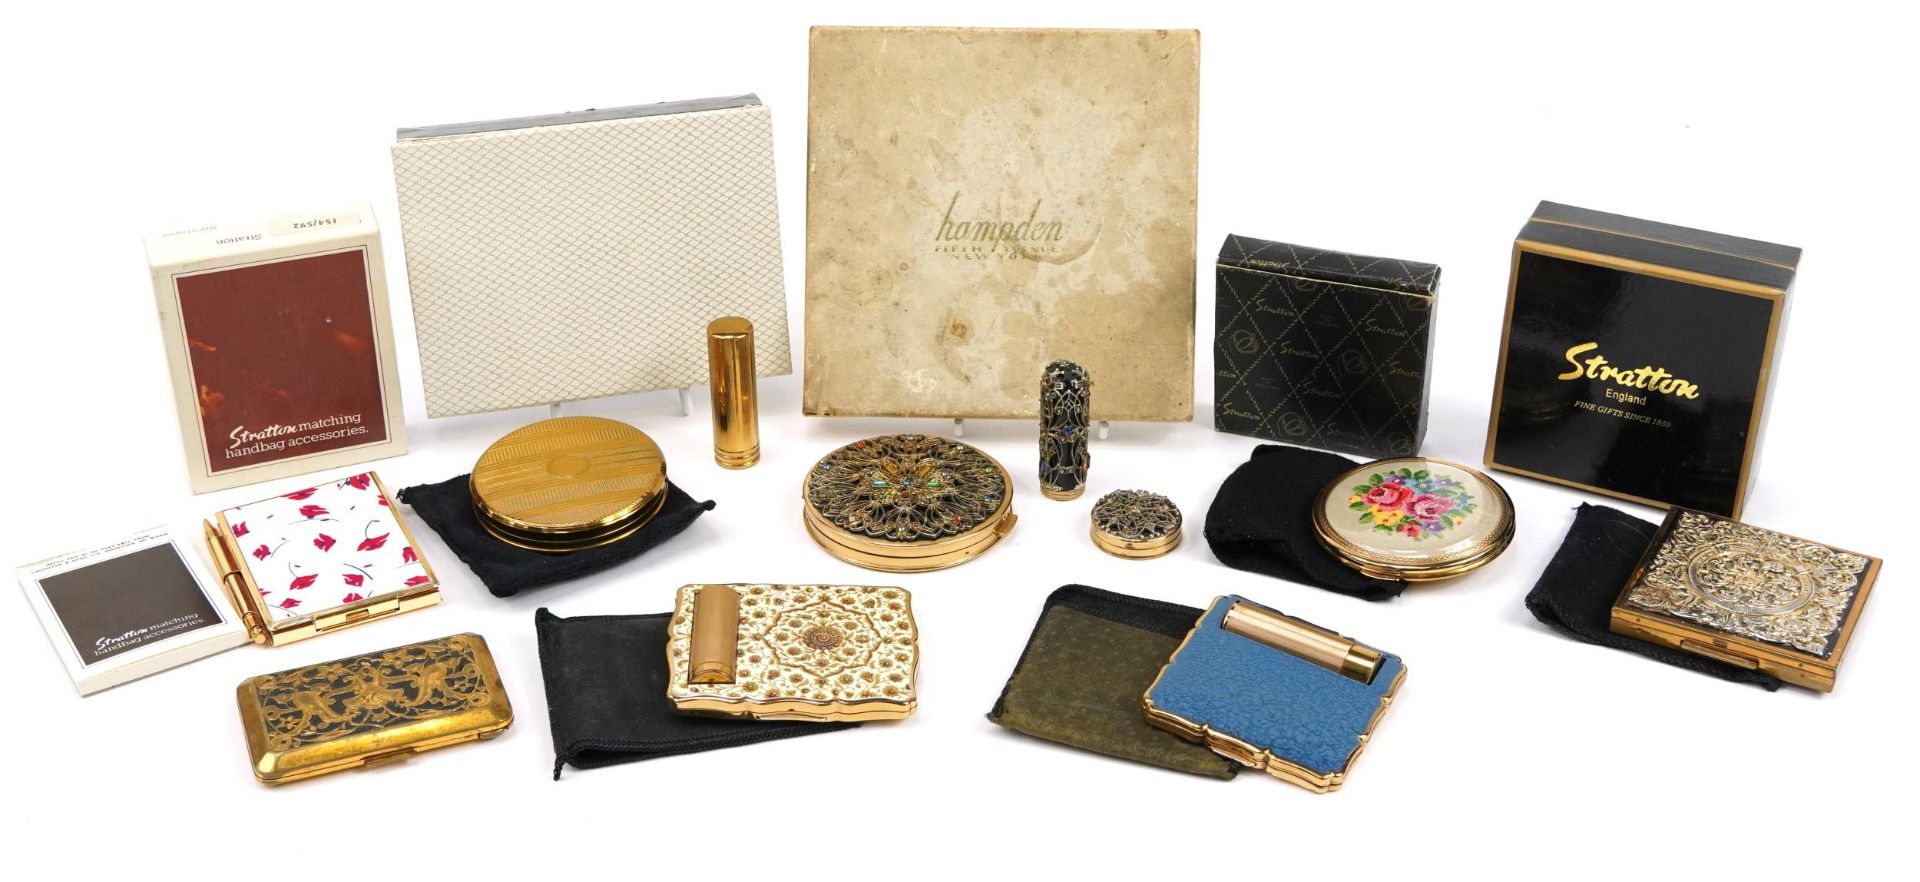 Vintage ladies compacts including Hampden jewelled set with box, Kigu with box and Stratton